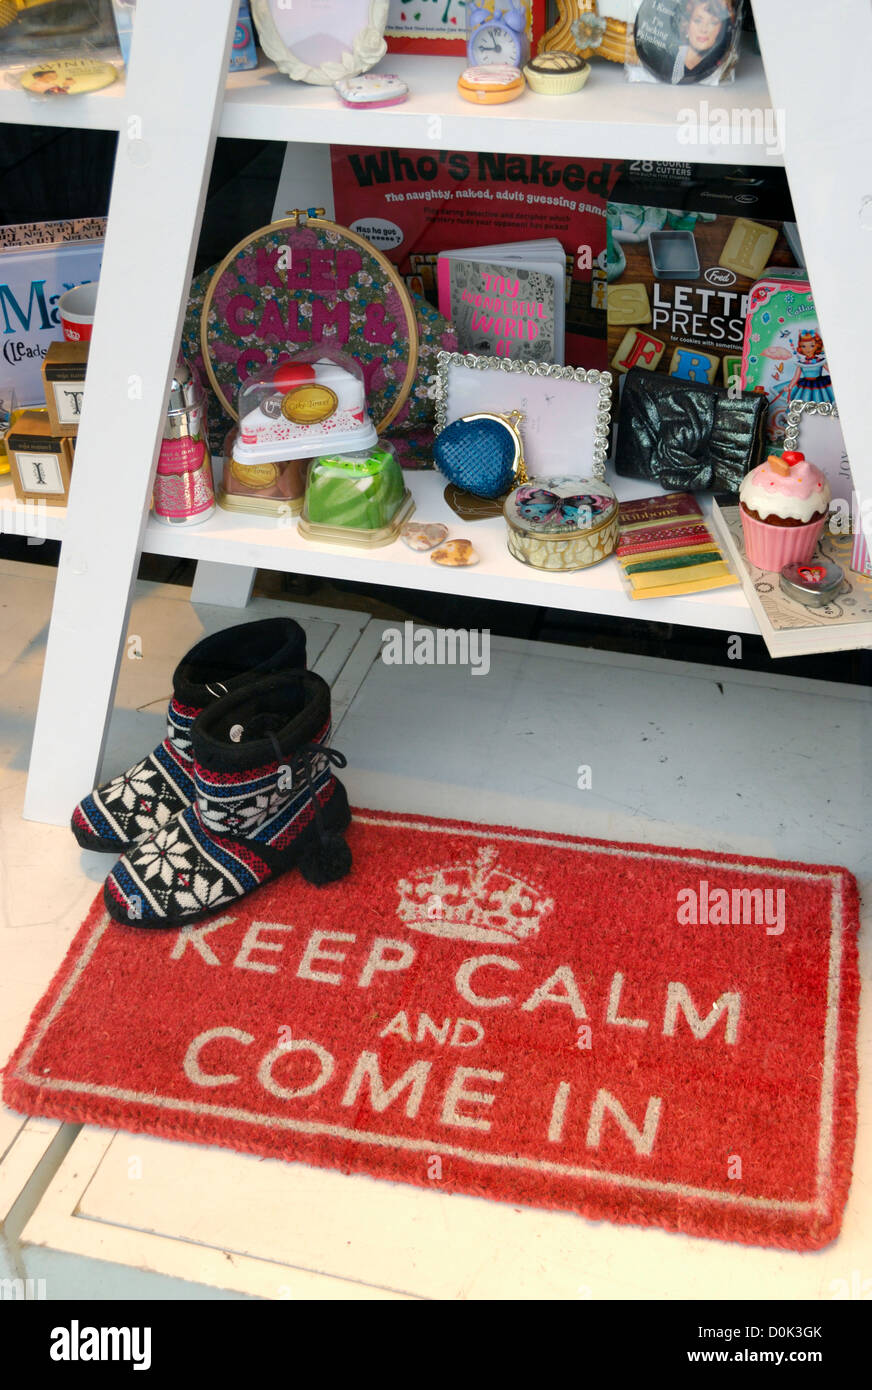 Keep Calm and Come in sign in a shop window. Stock Photo